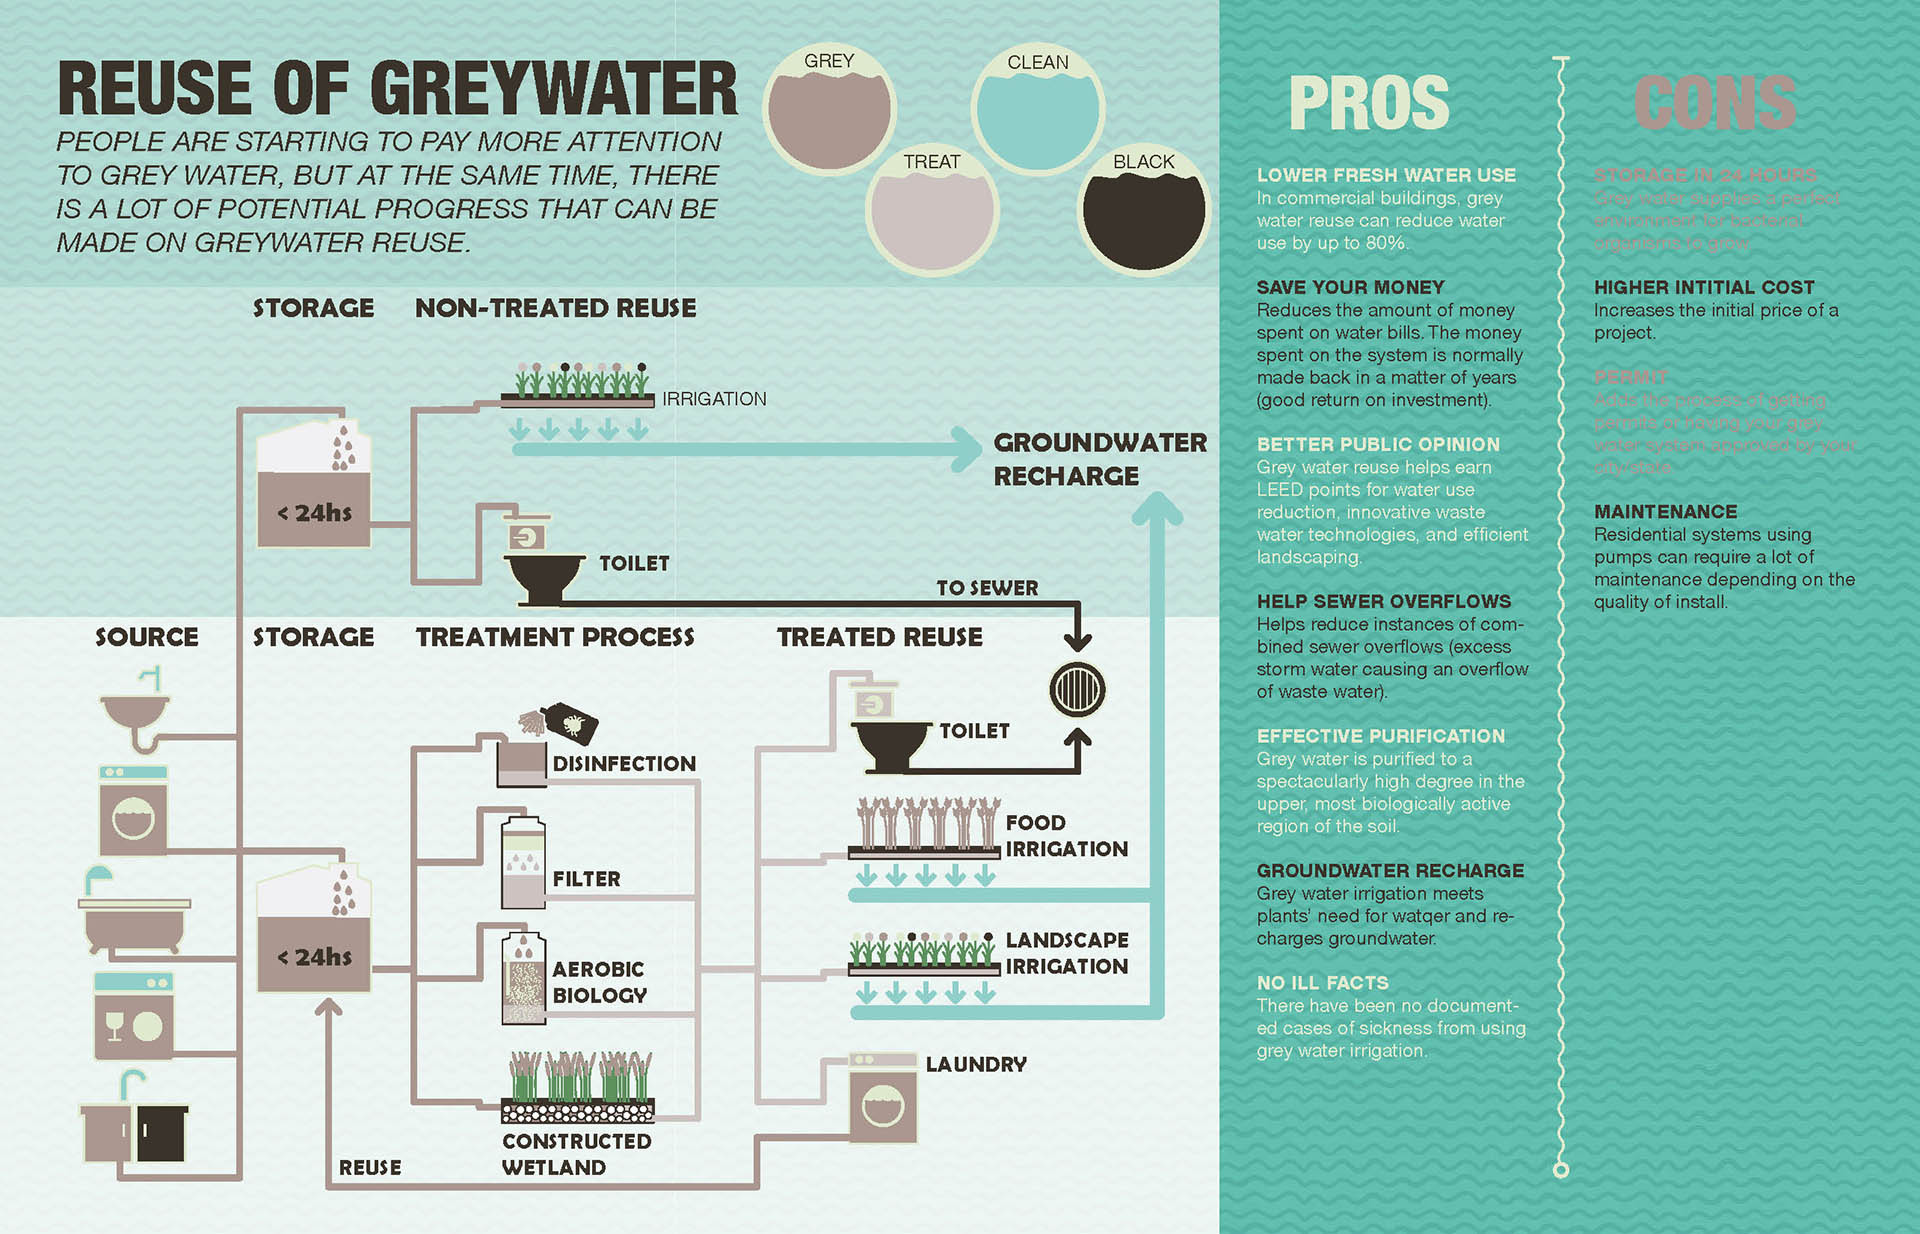 02 Grey water reuse system and its Pros and Cons.jpg